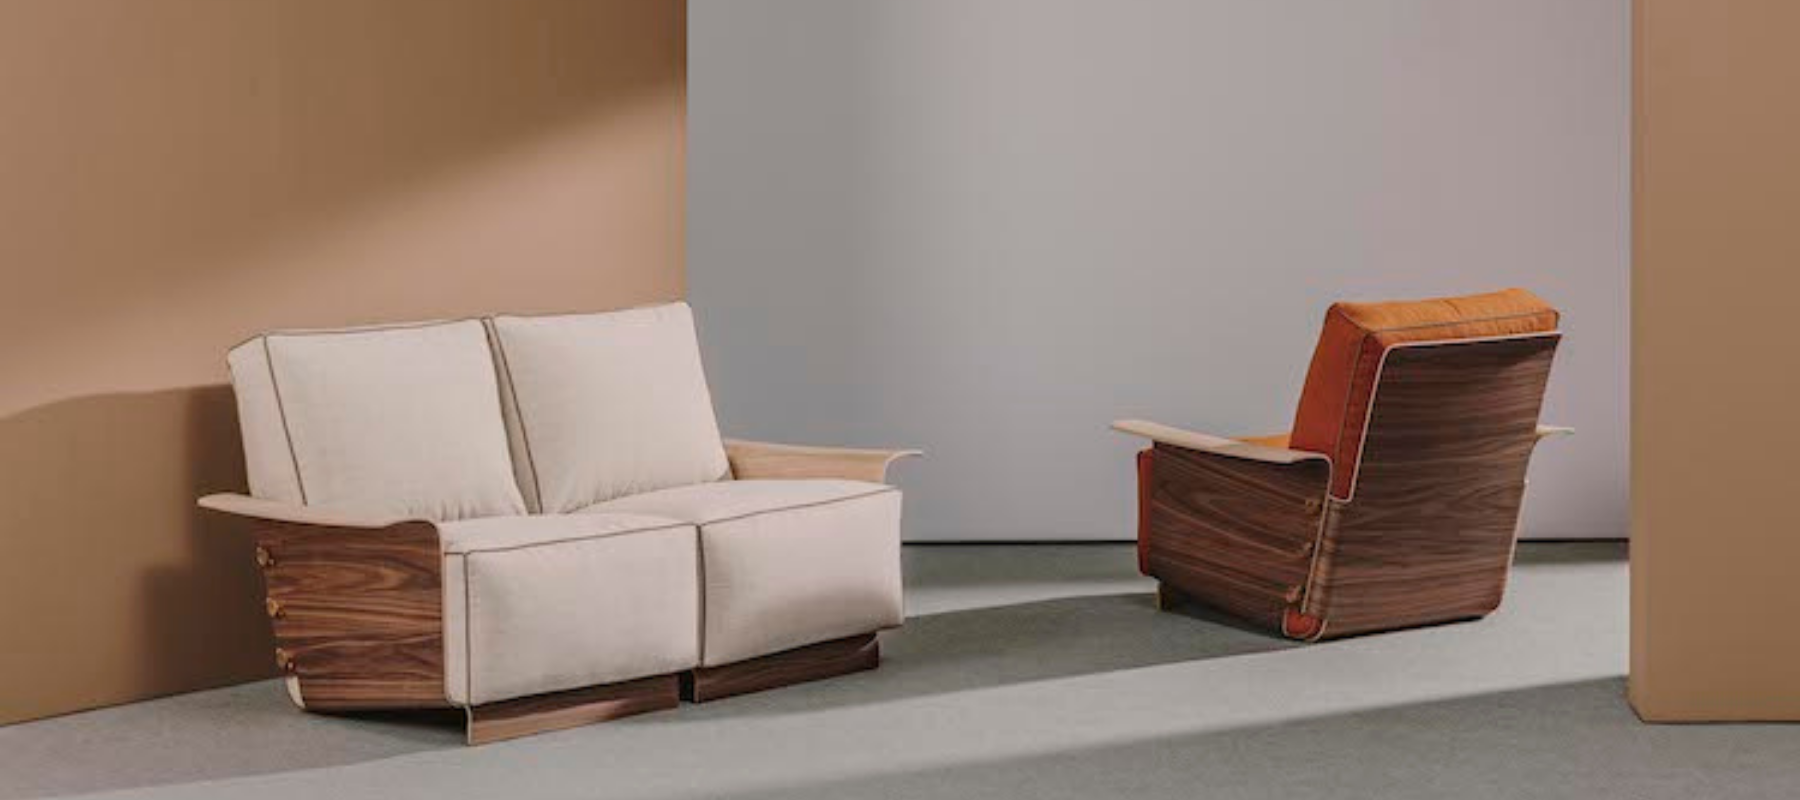 a sofa and lounge chair with wood details